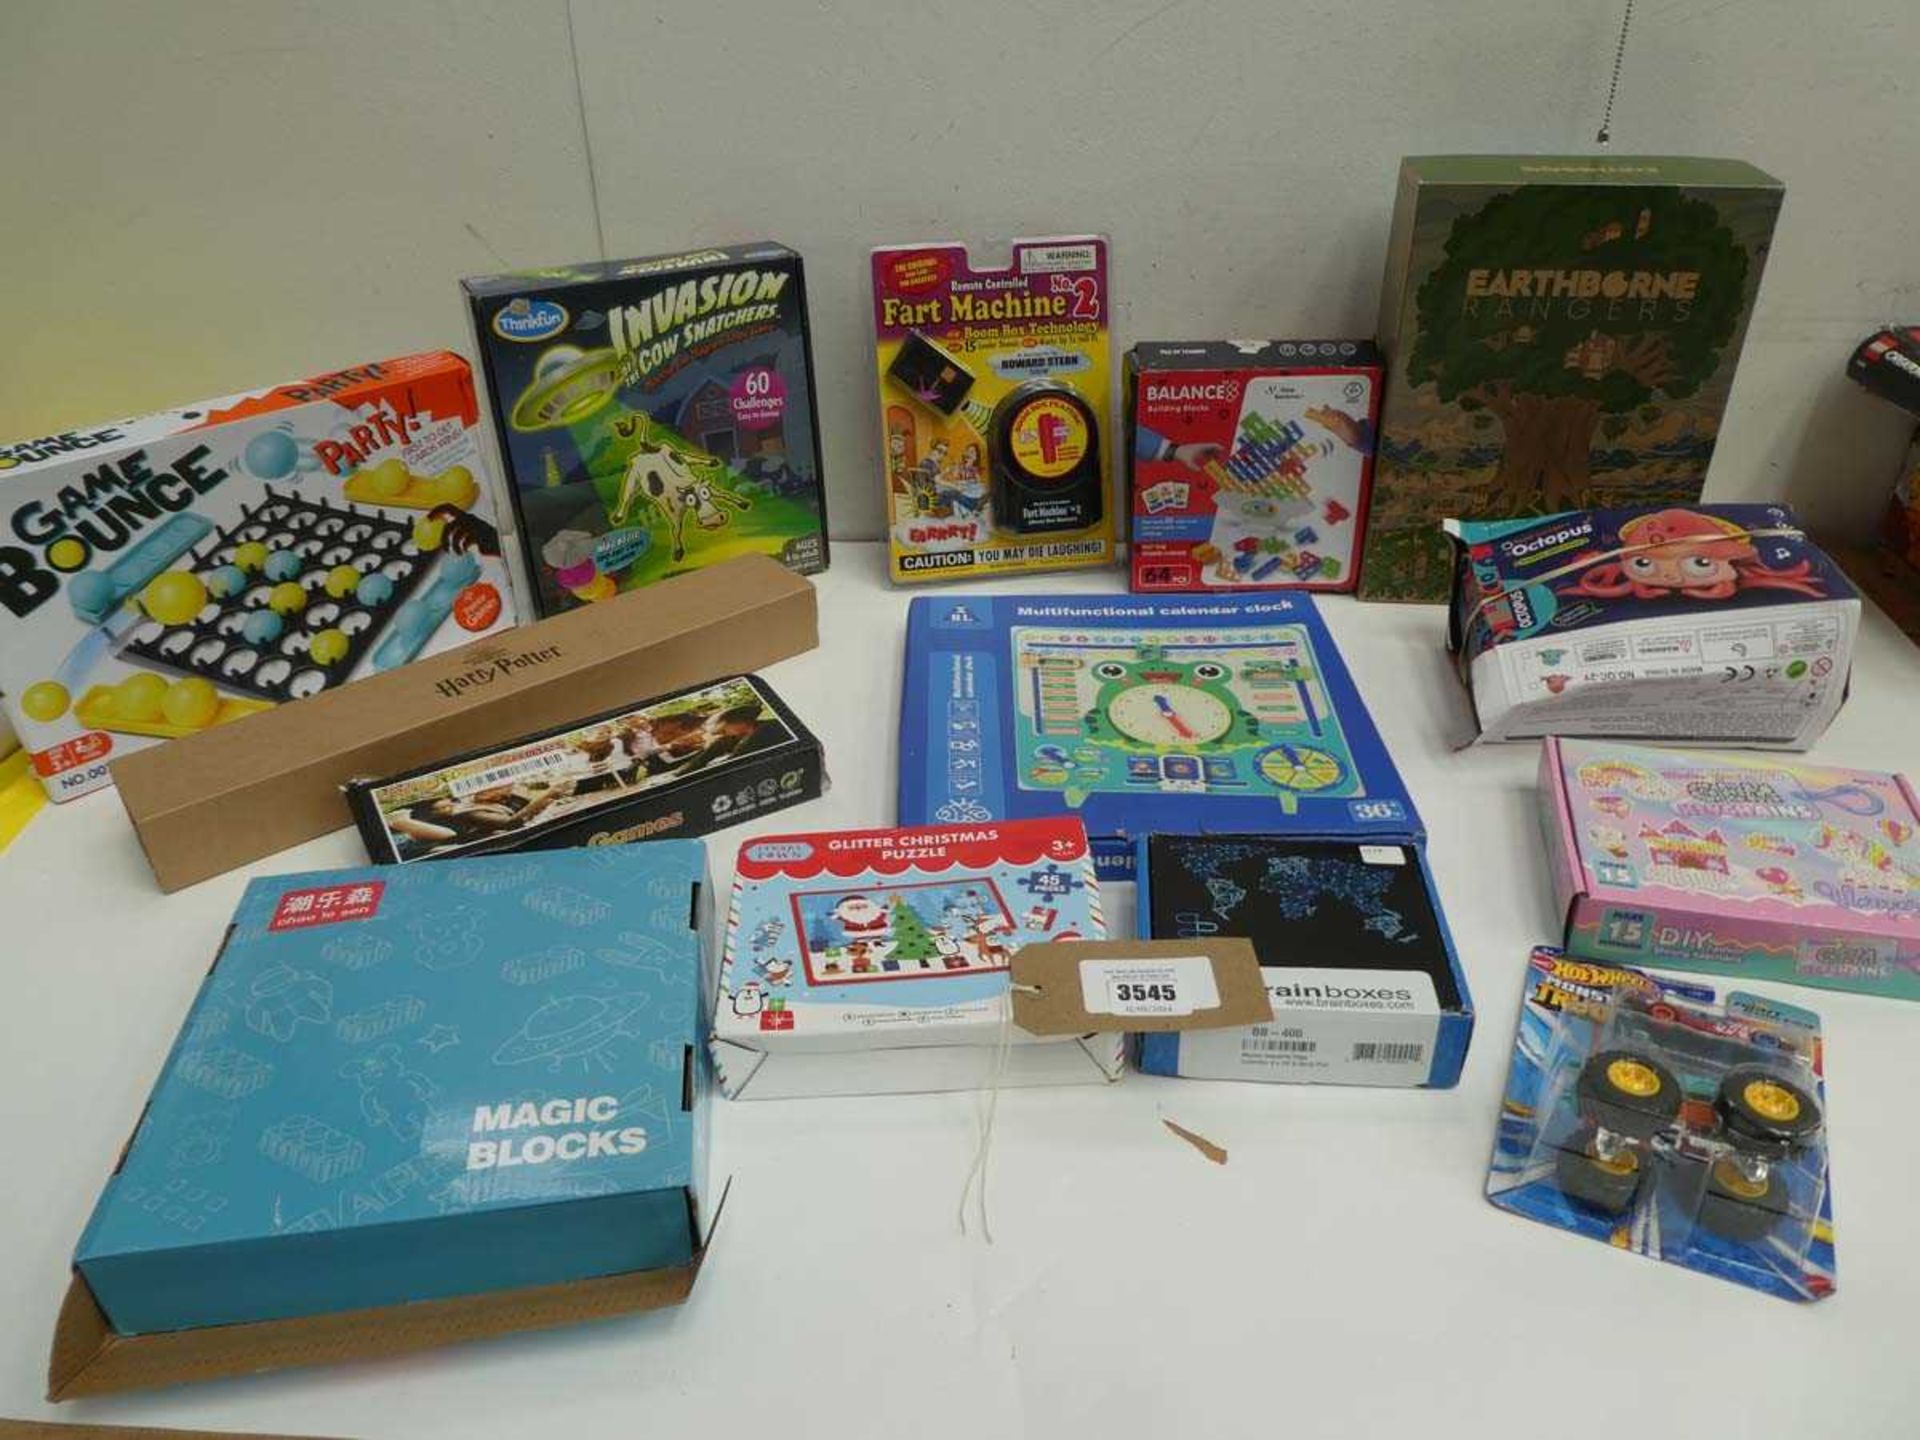 +VAT Selection of toys & games including Invasion of the Cow Snatchers, Earthborne Rngers, Game